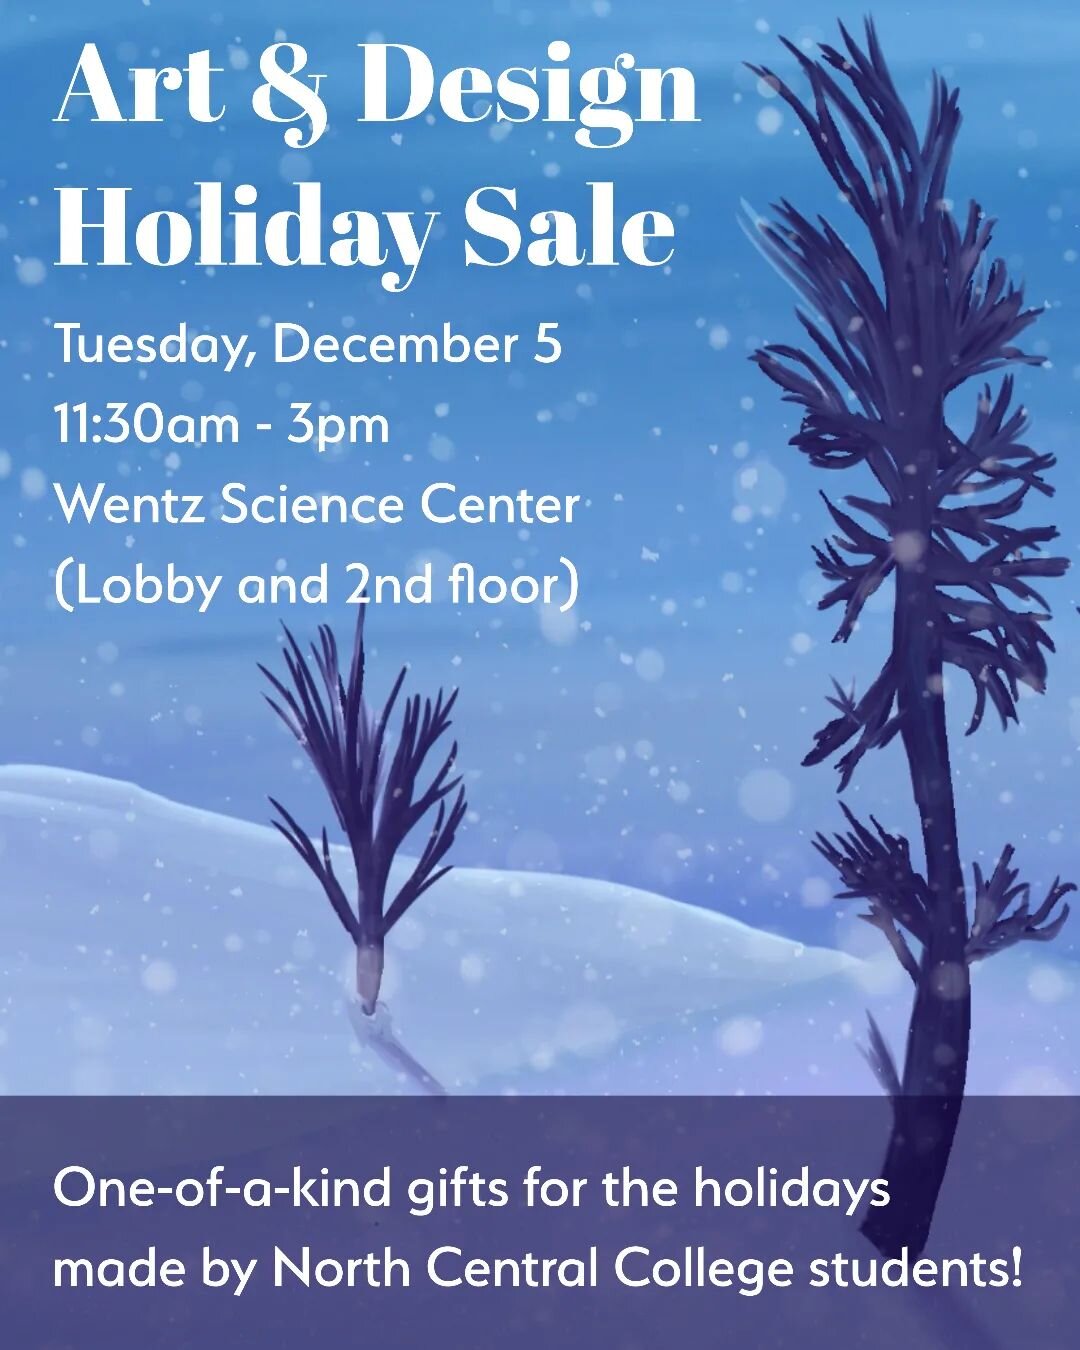 Happy December! Don't forget that the Holiday Art &amp; Design sale will take place this Tuesday, December 5th starting at 11:30 am at the Wentz Science Center lobby! This is the perfect opportunity to get some holiday shopping done all while support